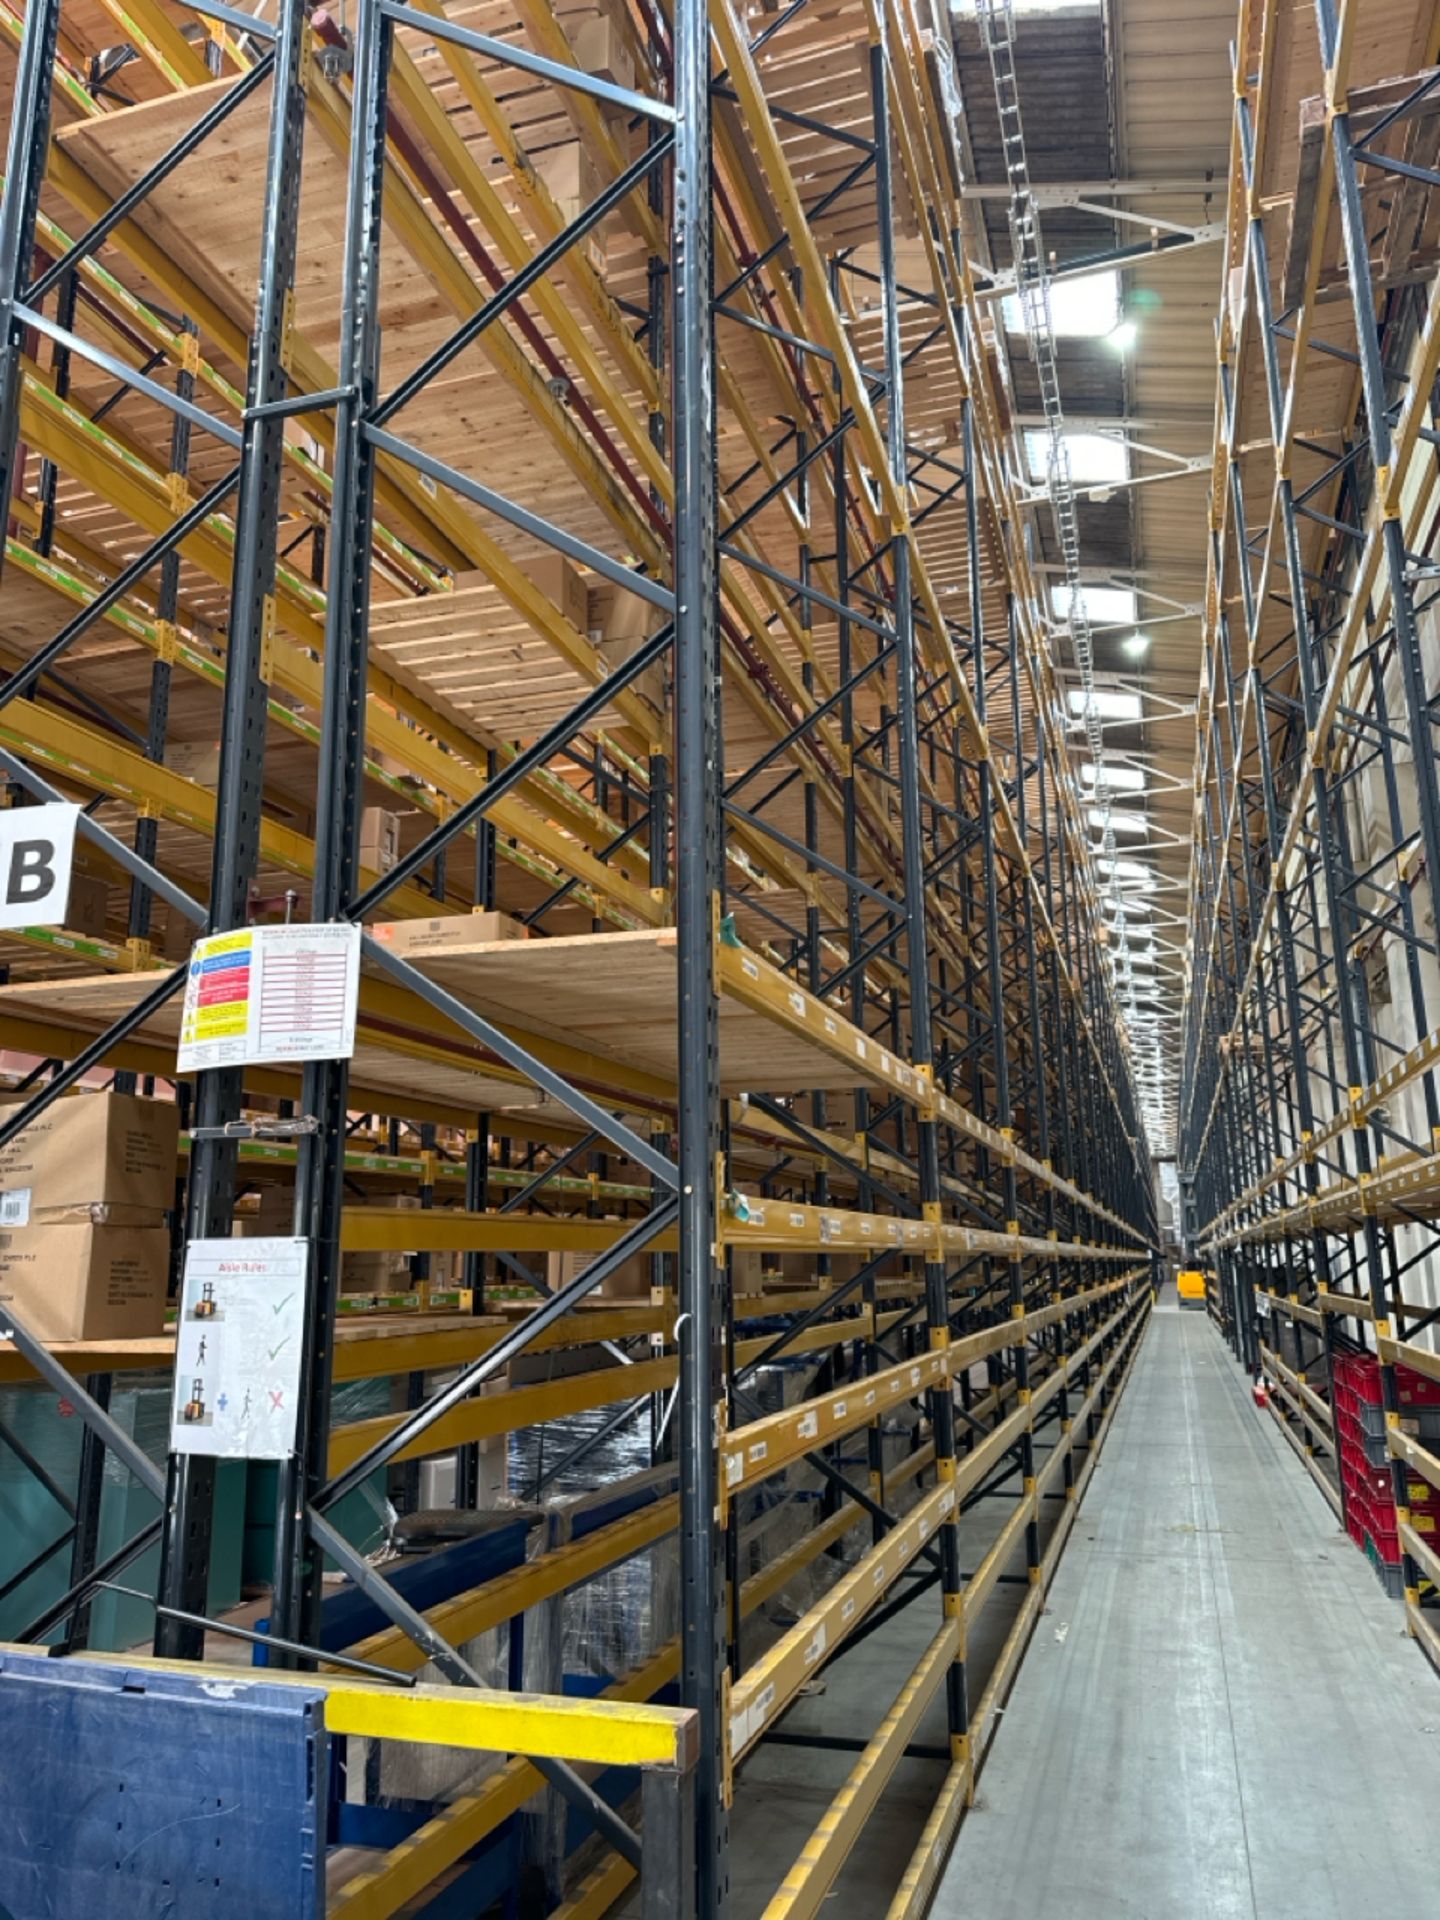 Run Of 18 Bays Of Boltless Industrial Pallet Racking - Image 14 of 15